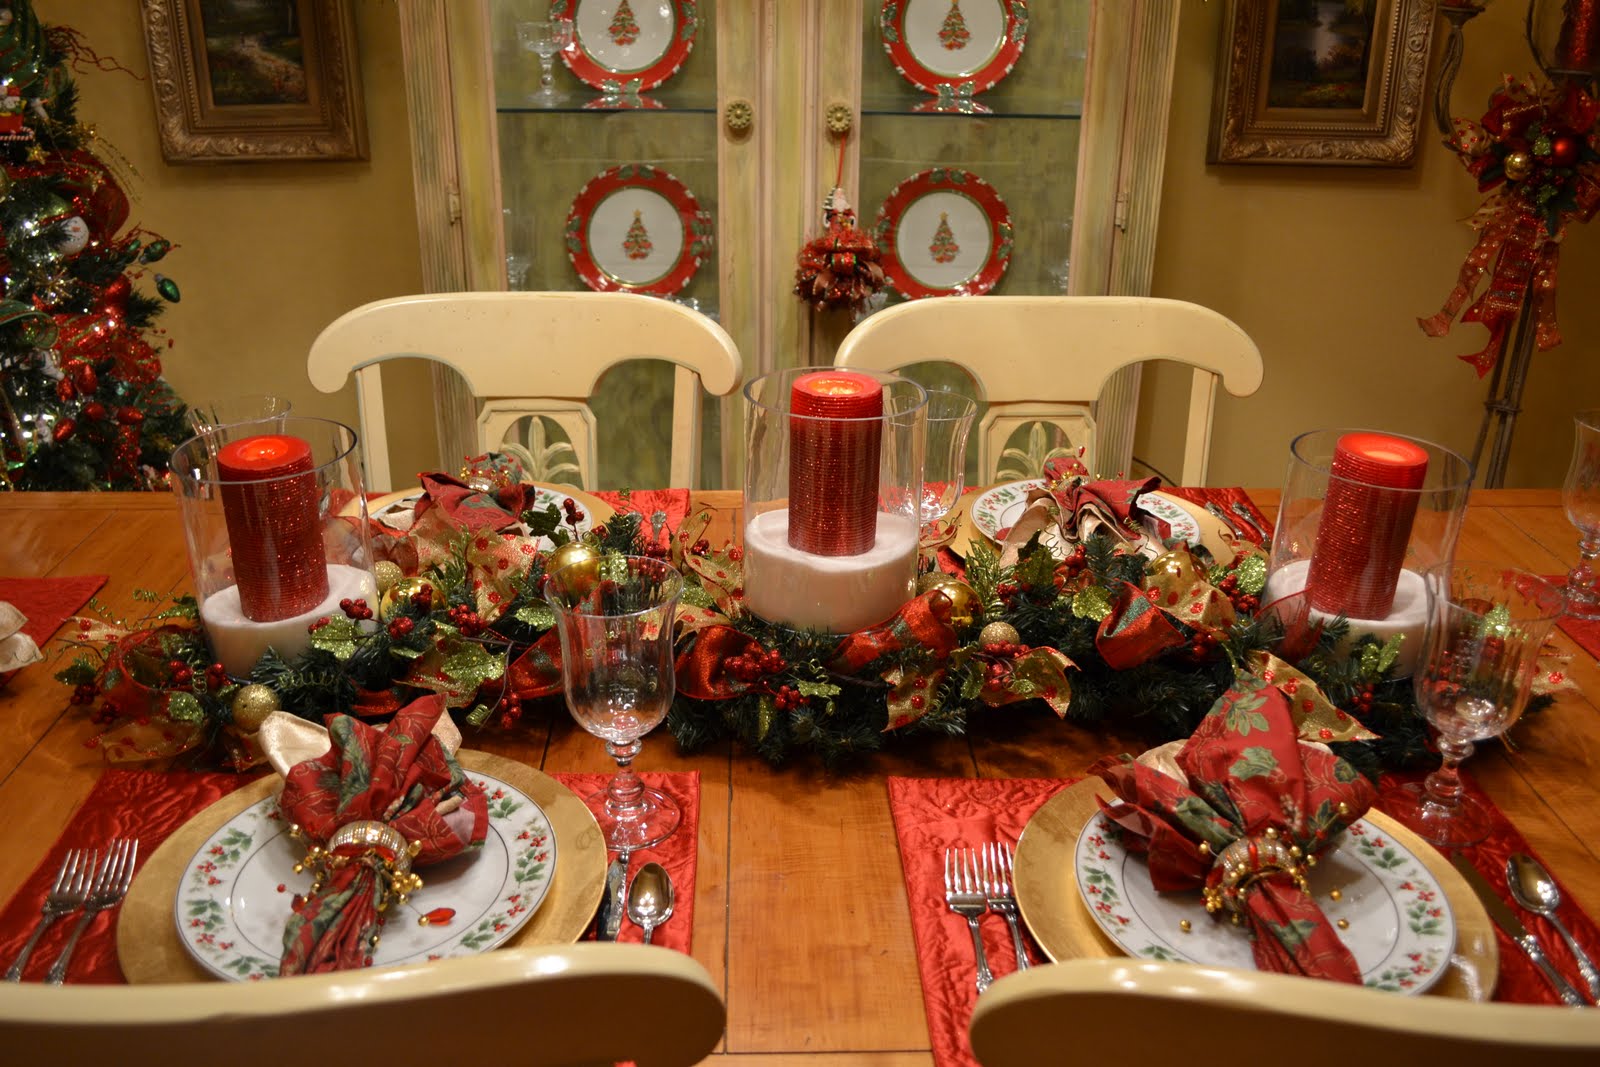 Kristen's Creations: My Christmas Dining Room